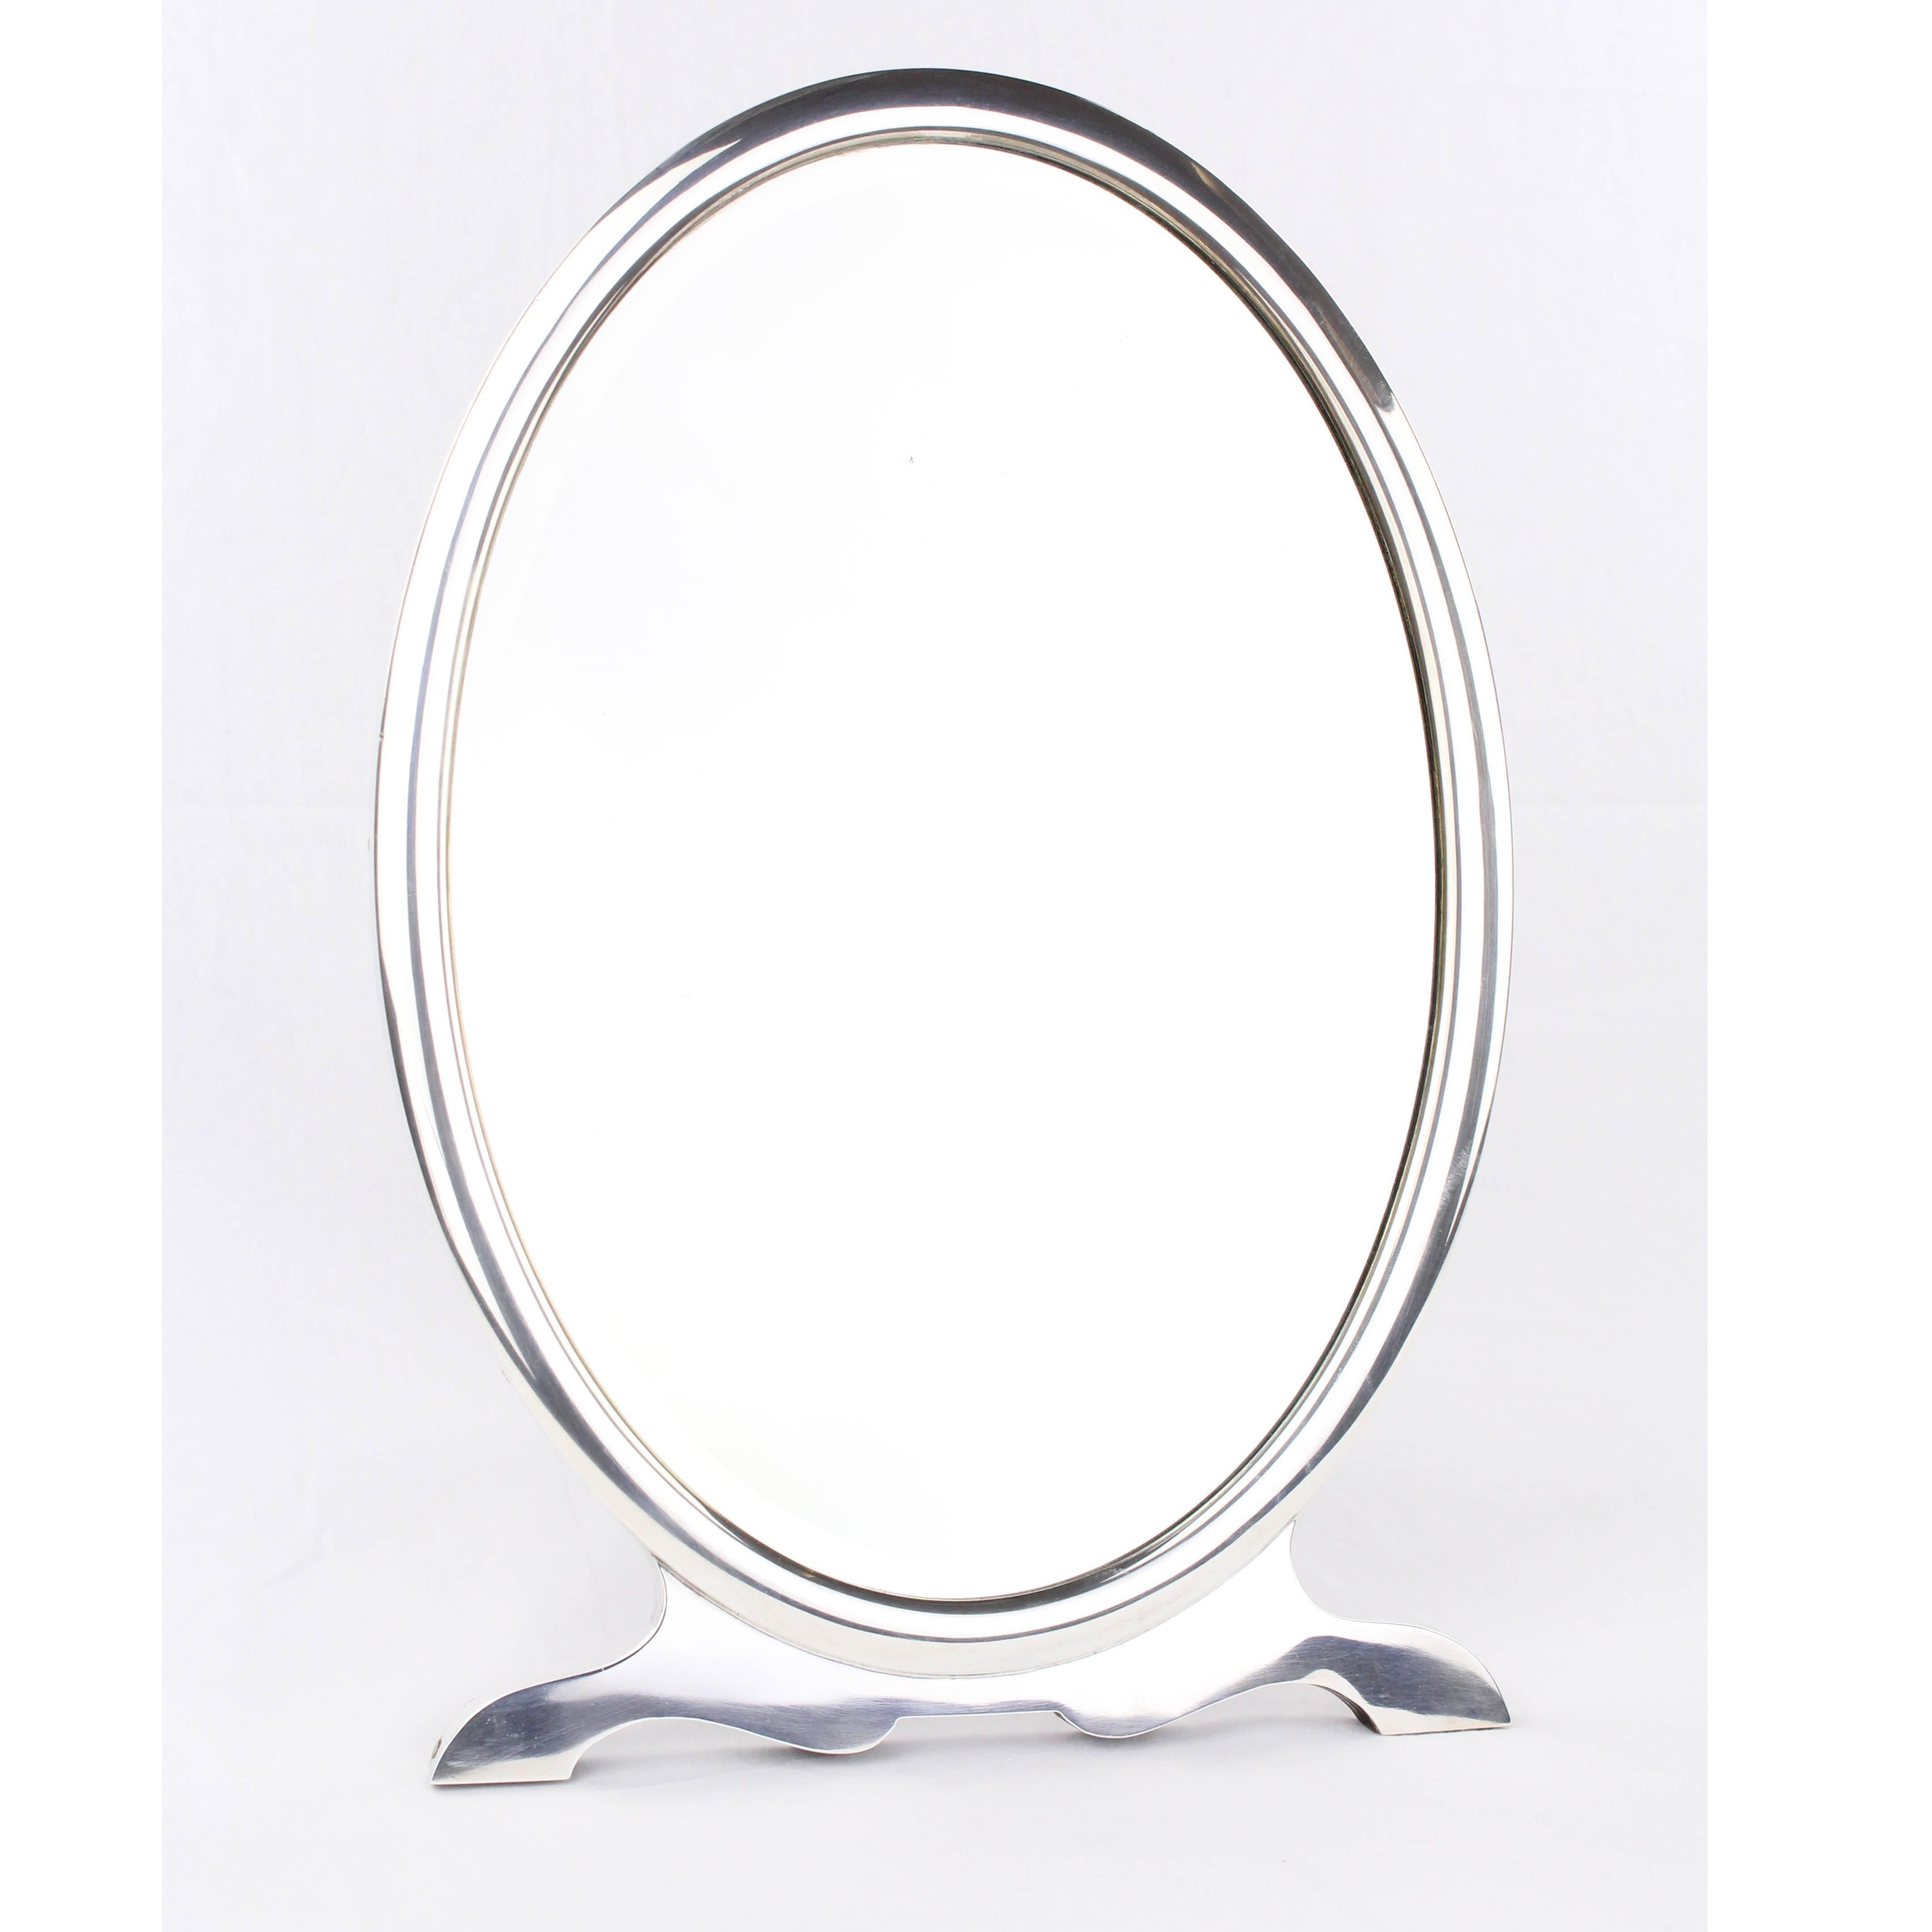 Early 20th Century Table Makeup Mirror, German Art Deco, 925 Sterling Silver, circa 1920-1930